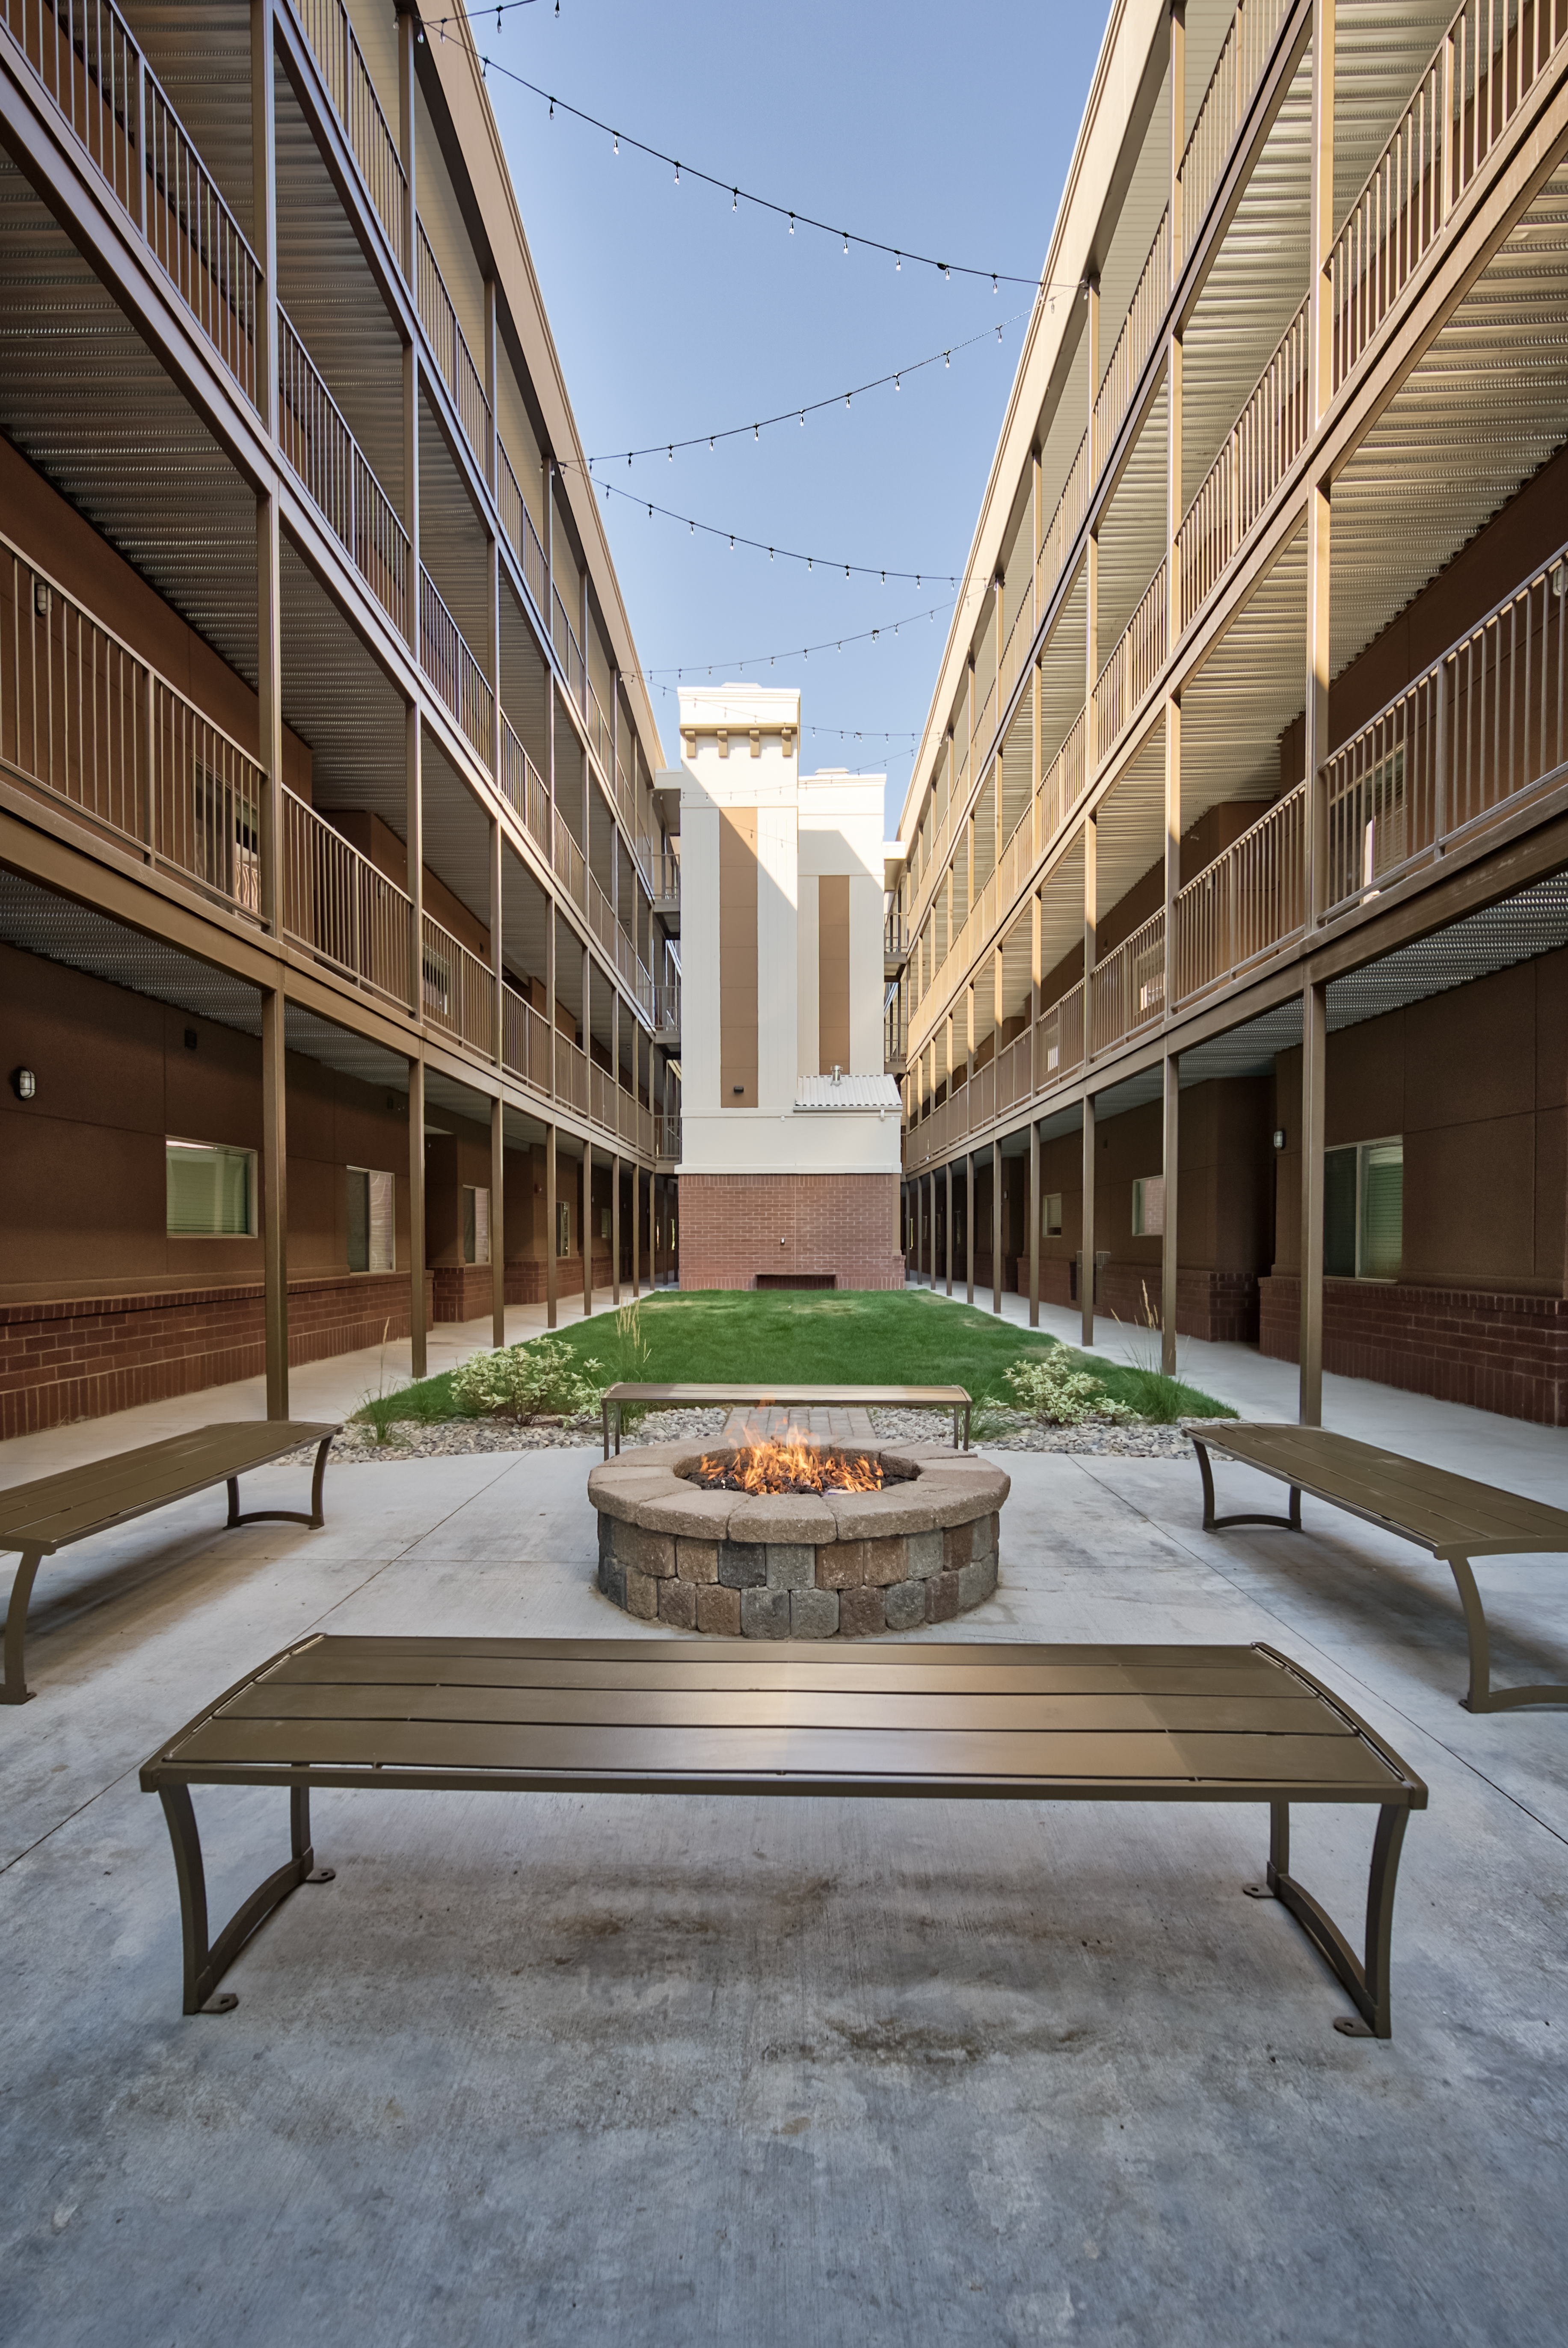 The courtyard is the social hub of The Landing, with two large fire pits and a grill, it is a great space to spend time with friends.